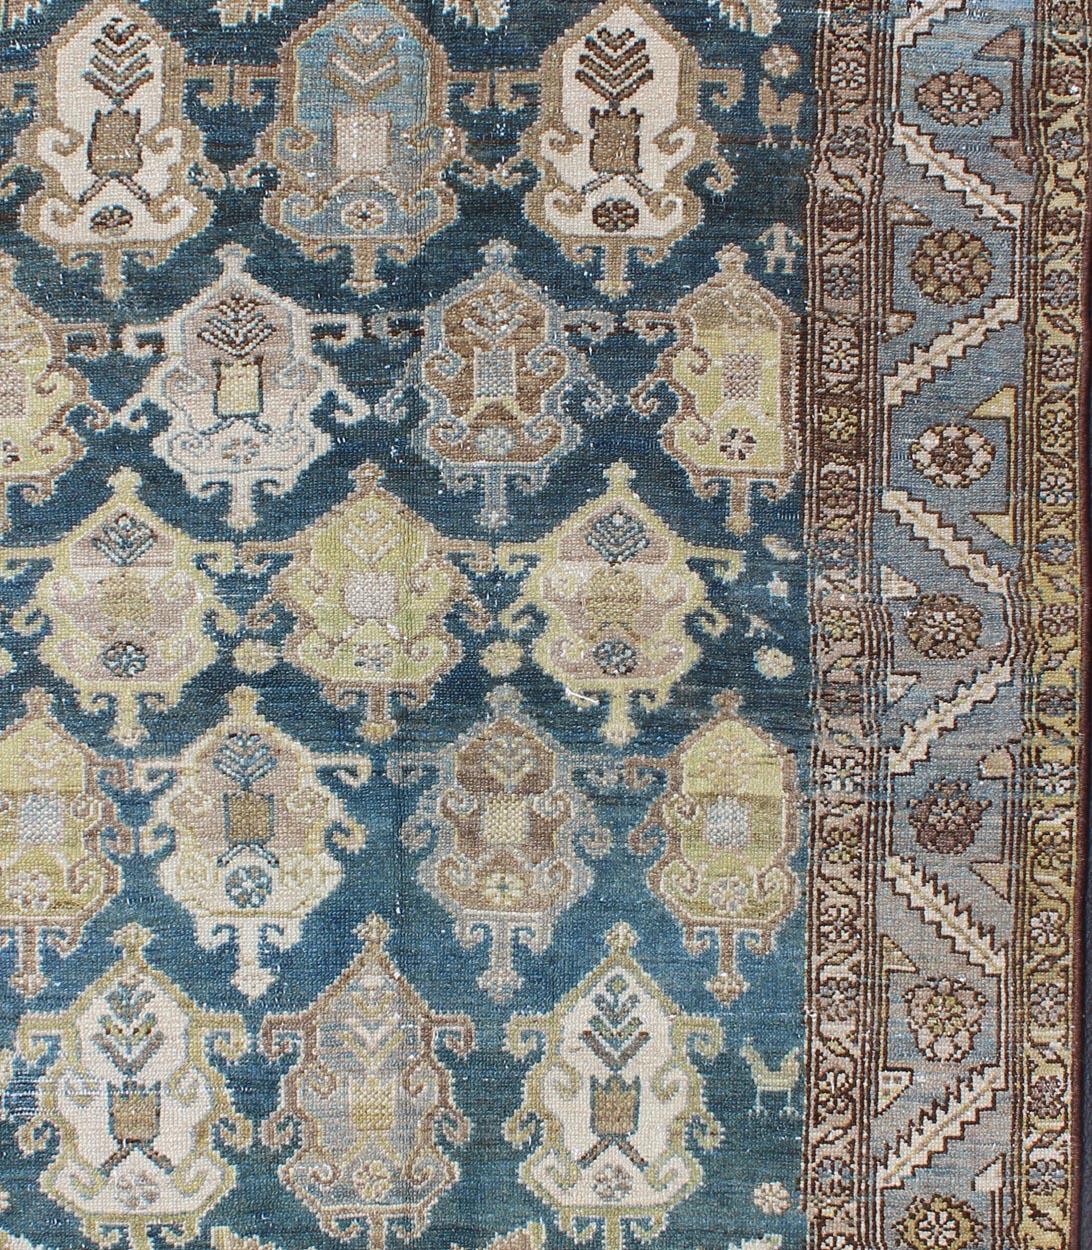 Shades of Blue and Ivory Antique Persian Fine Malayer Rug, Large Scale Design In Excellent Condition For Sale In Atlanta, GA